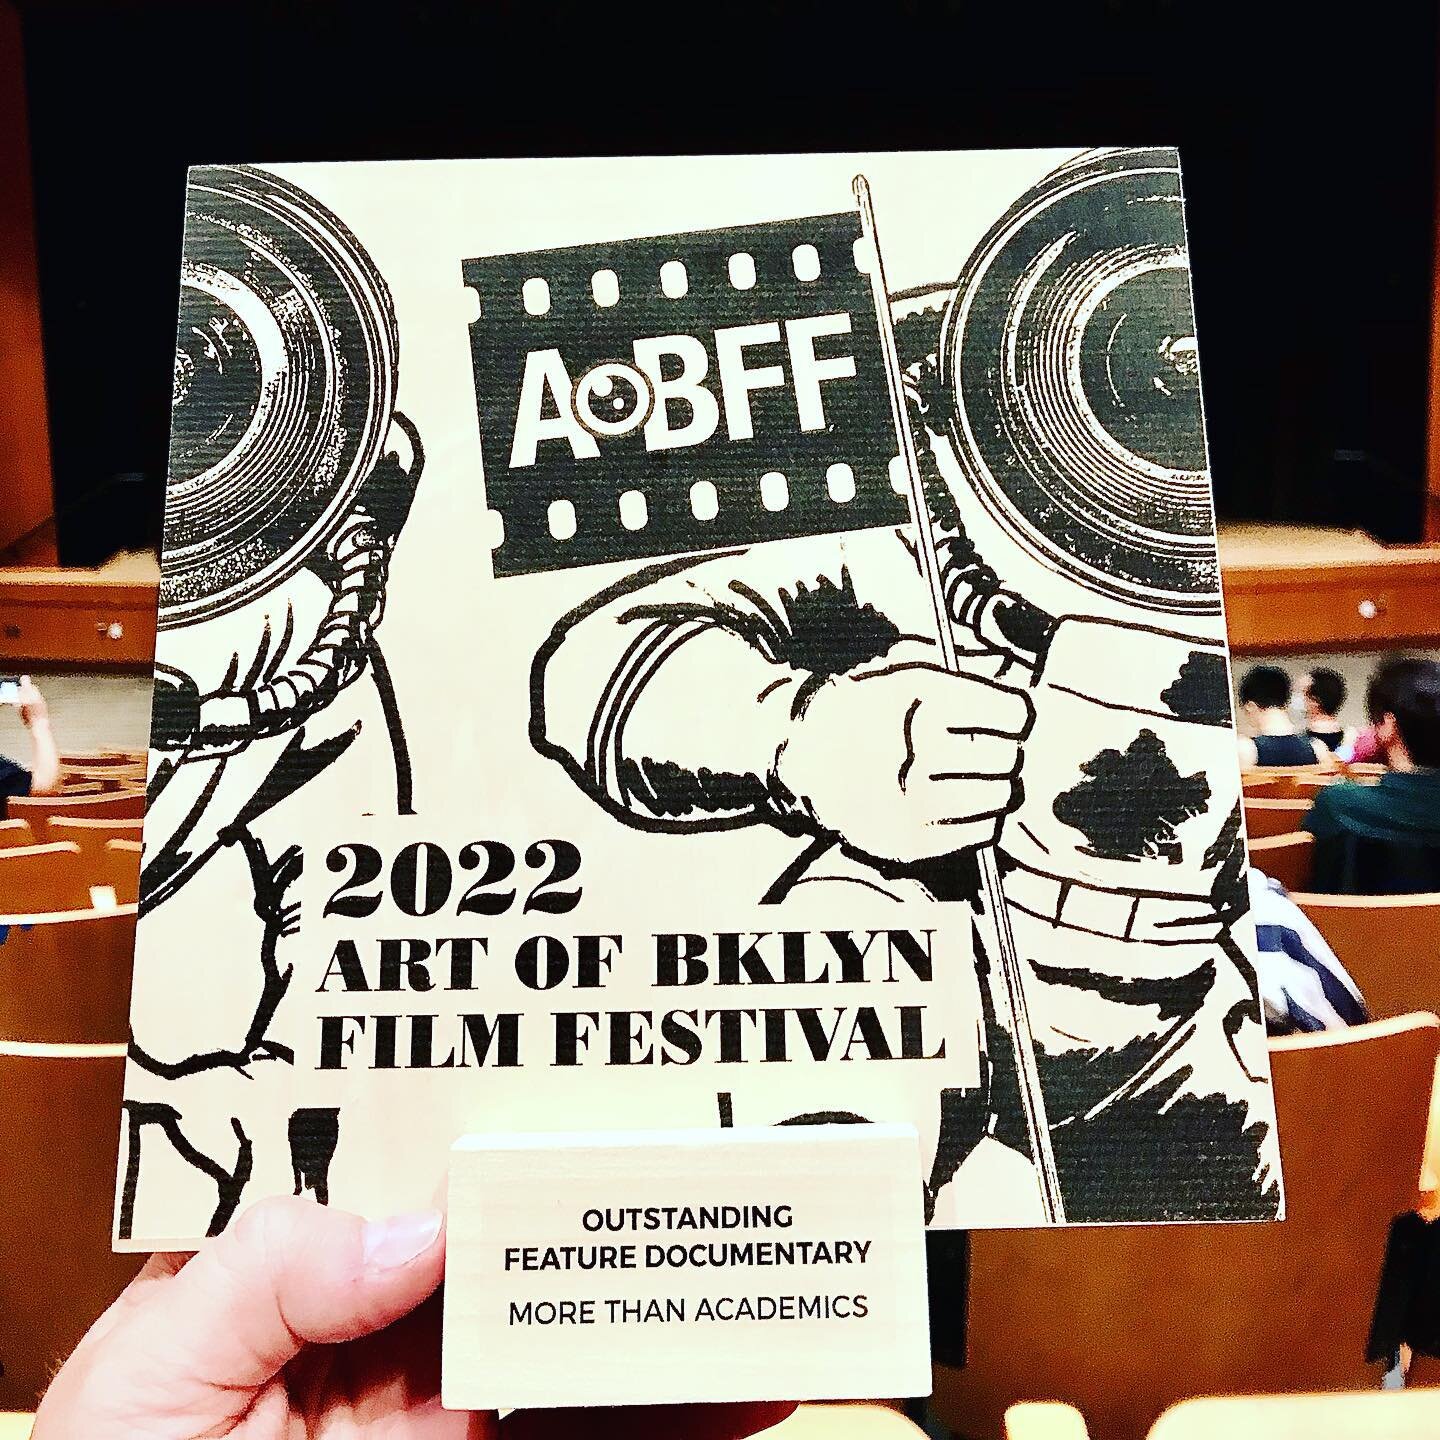 We won &ldquo;Outstanding Feature Documentary&rdquo; at the world premiere for More Than Academics! Thank you @theartofbklyn for recognizing our film! ✨✨
.
.
@morethanacademicsdocumentary @dejinay_beyondwords 
.
.
.
.
.
.
.
.
#femalefilmmakers #women